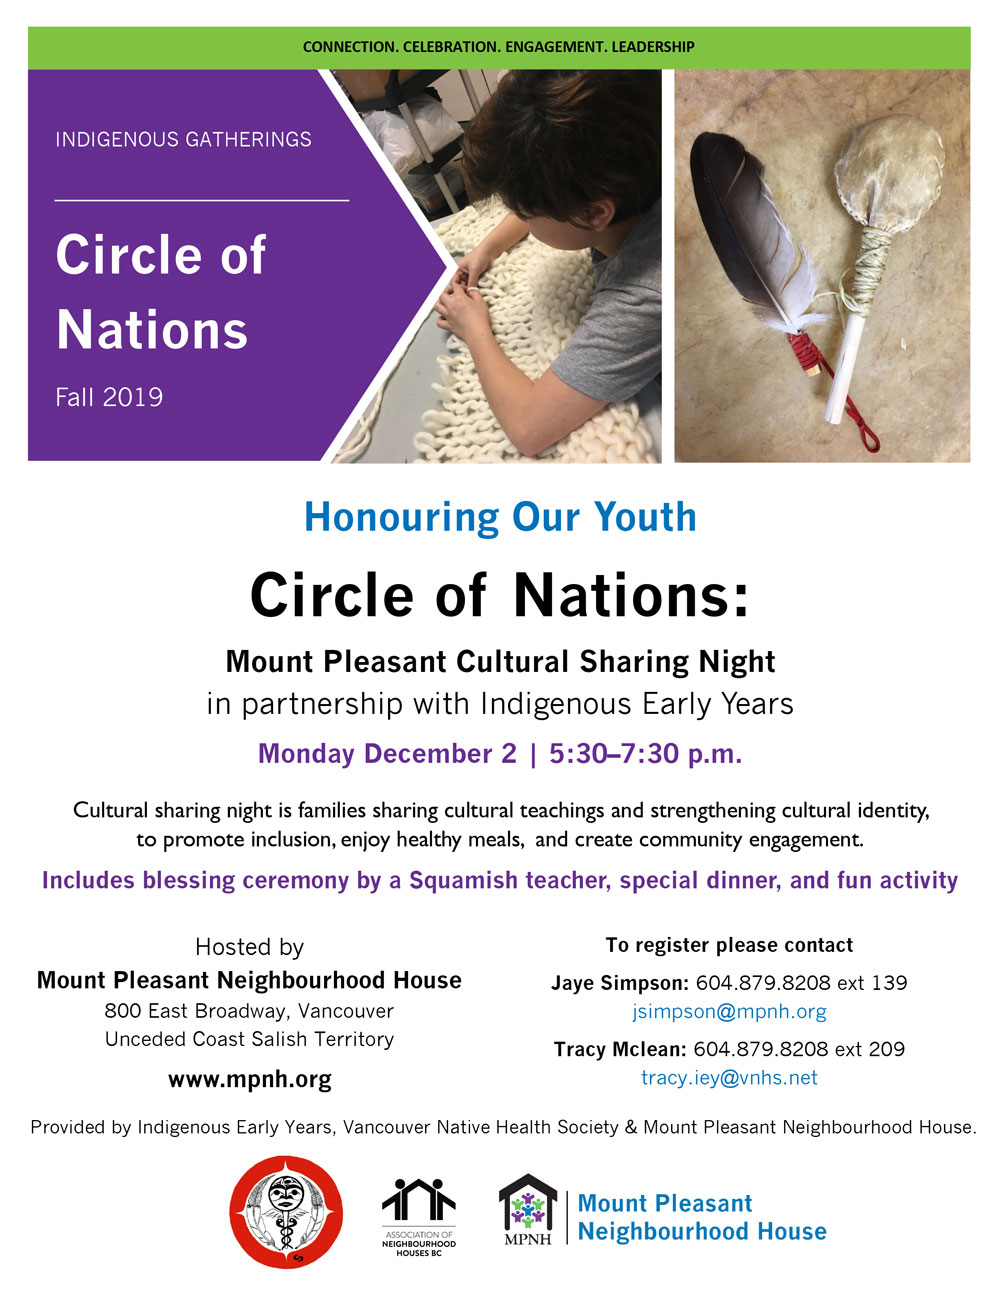 An image of the poster with event details, featuring photos of a young person weaving yarn, a ceremonial feather and a rattle